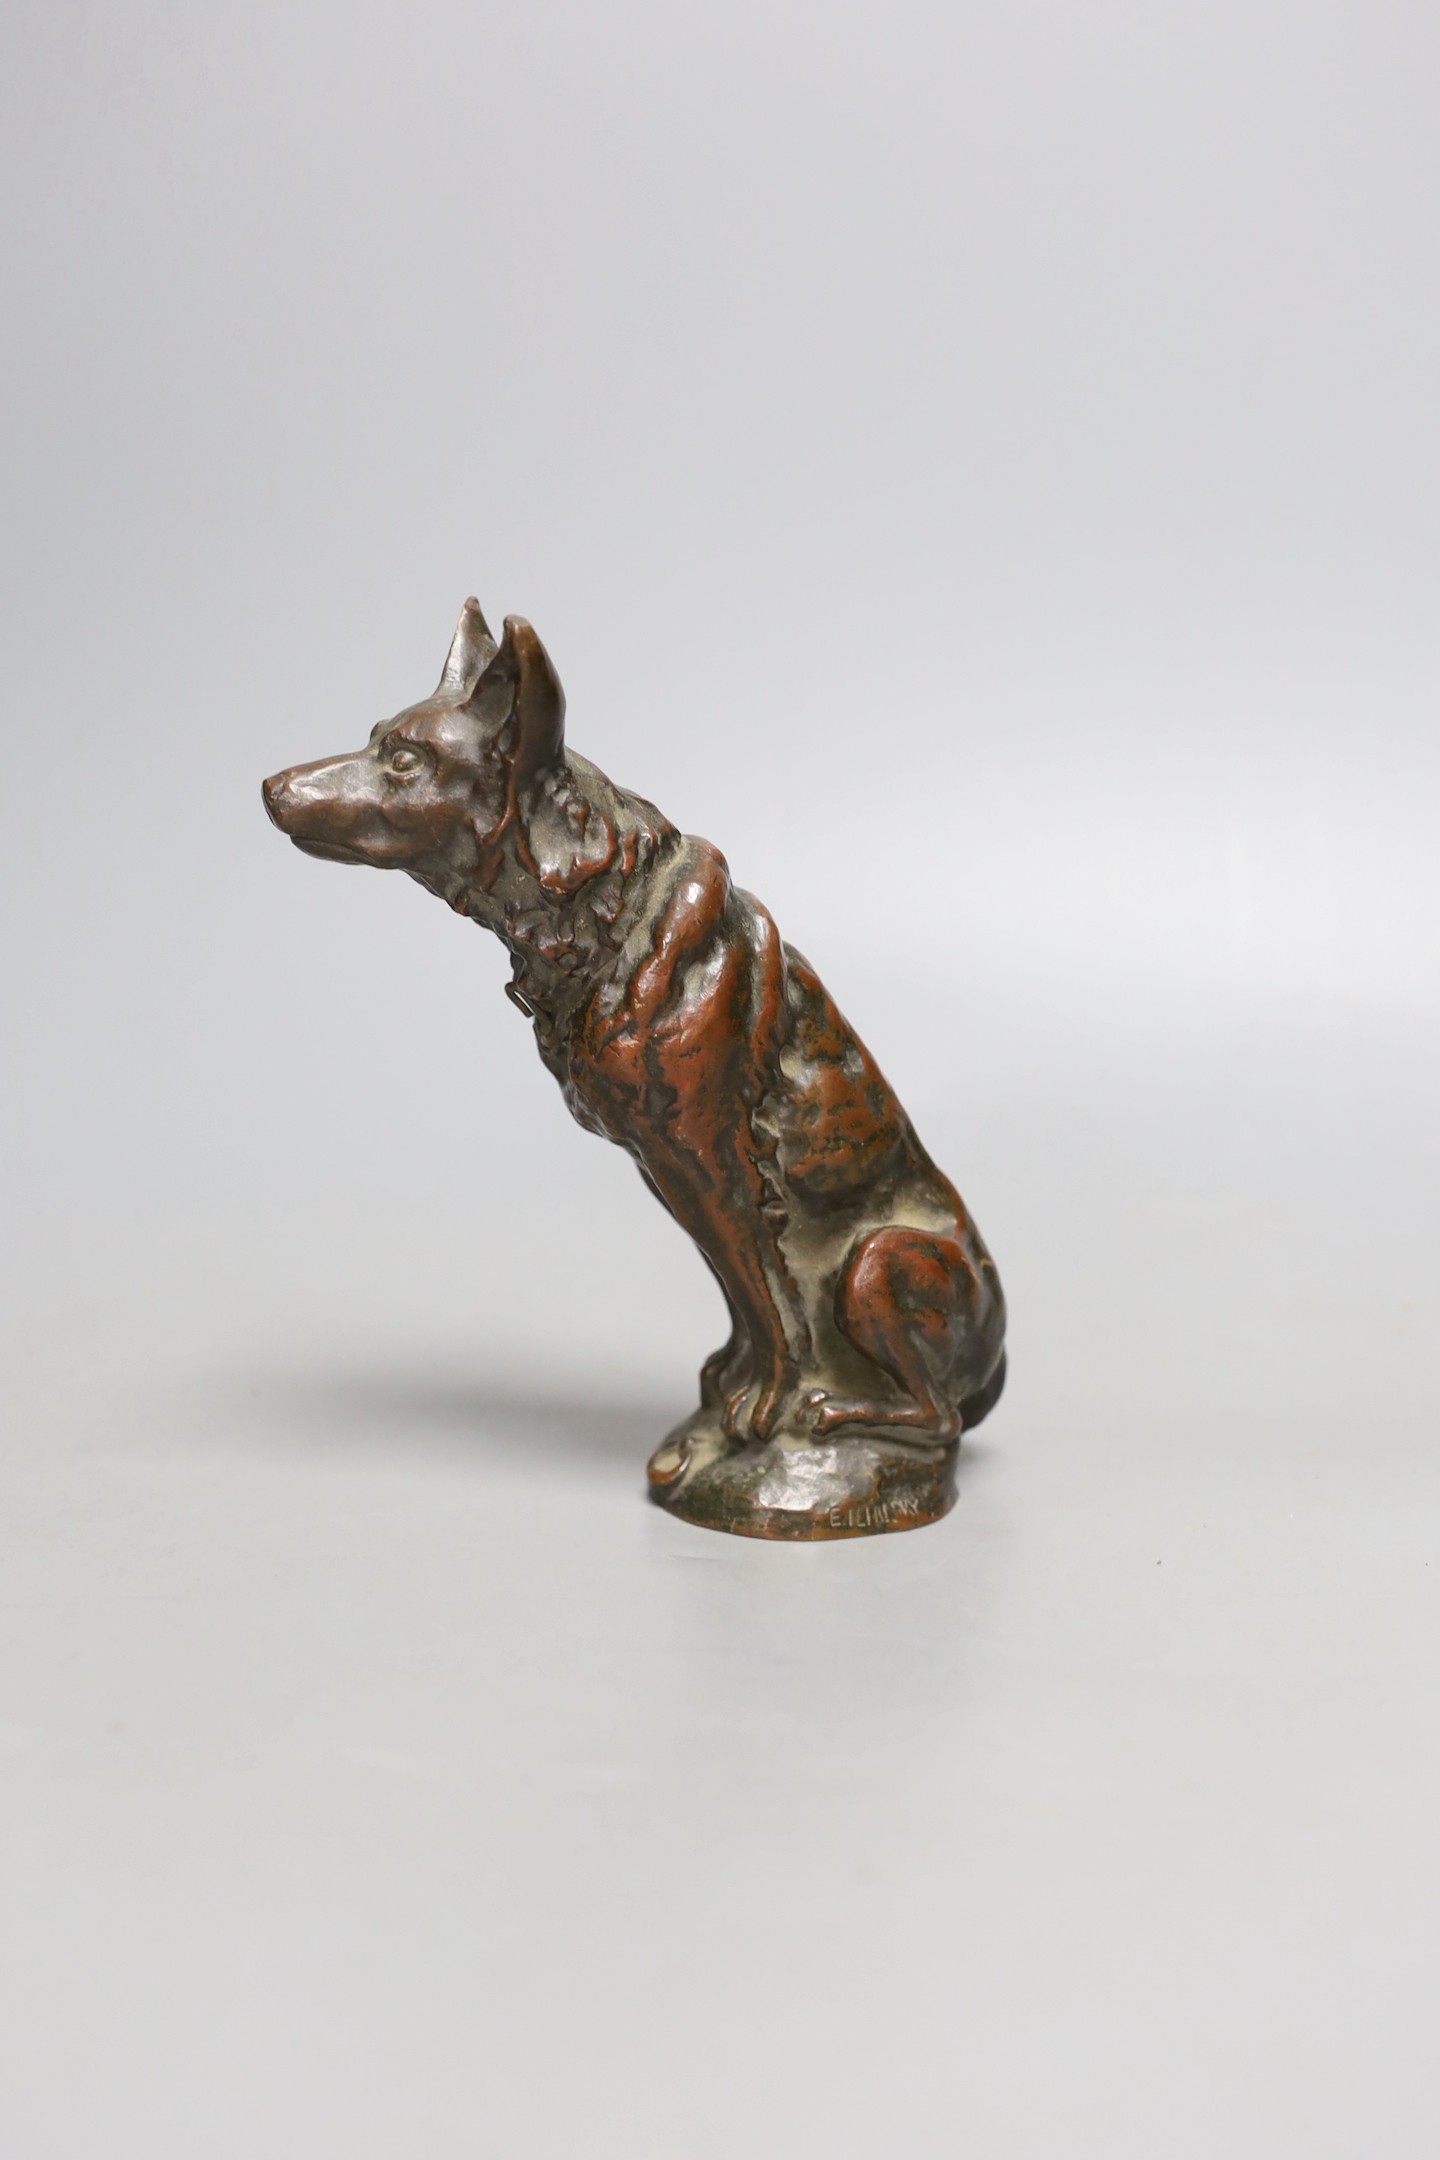 E, Ilinsky, a brown patinated bronze seated dog car mascot signed, worth foundry mark Fumiere et Cie, 16cm high